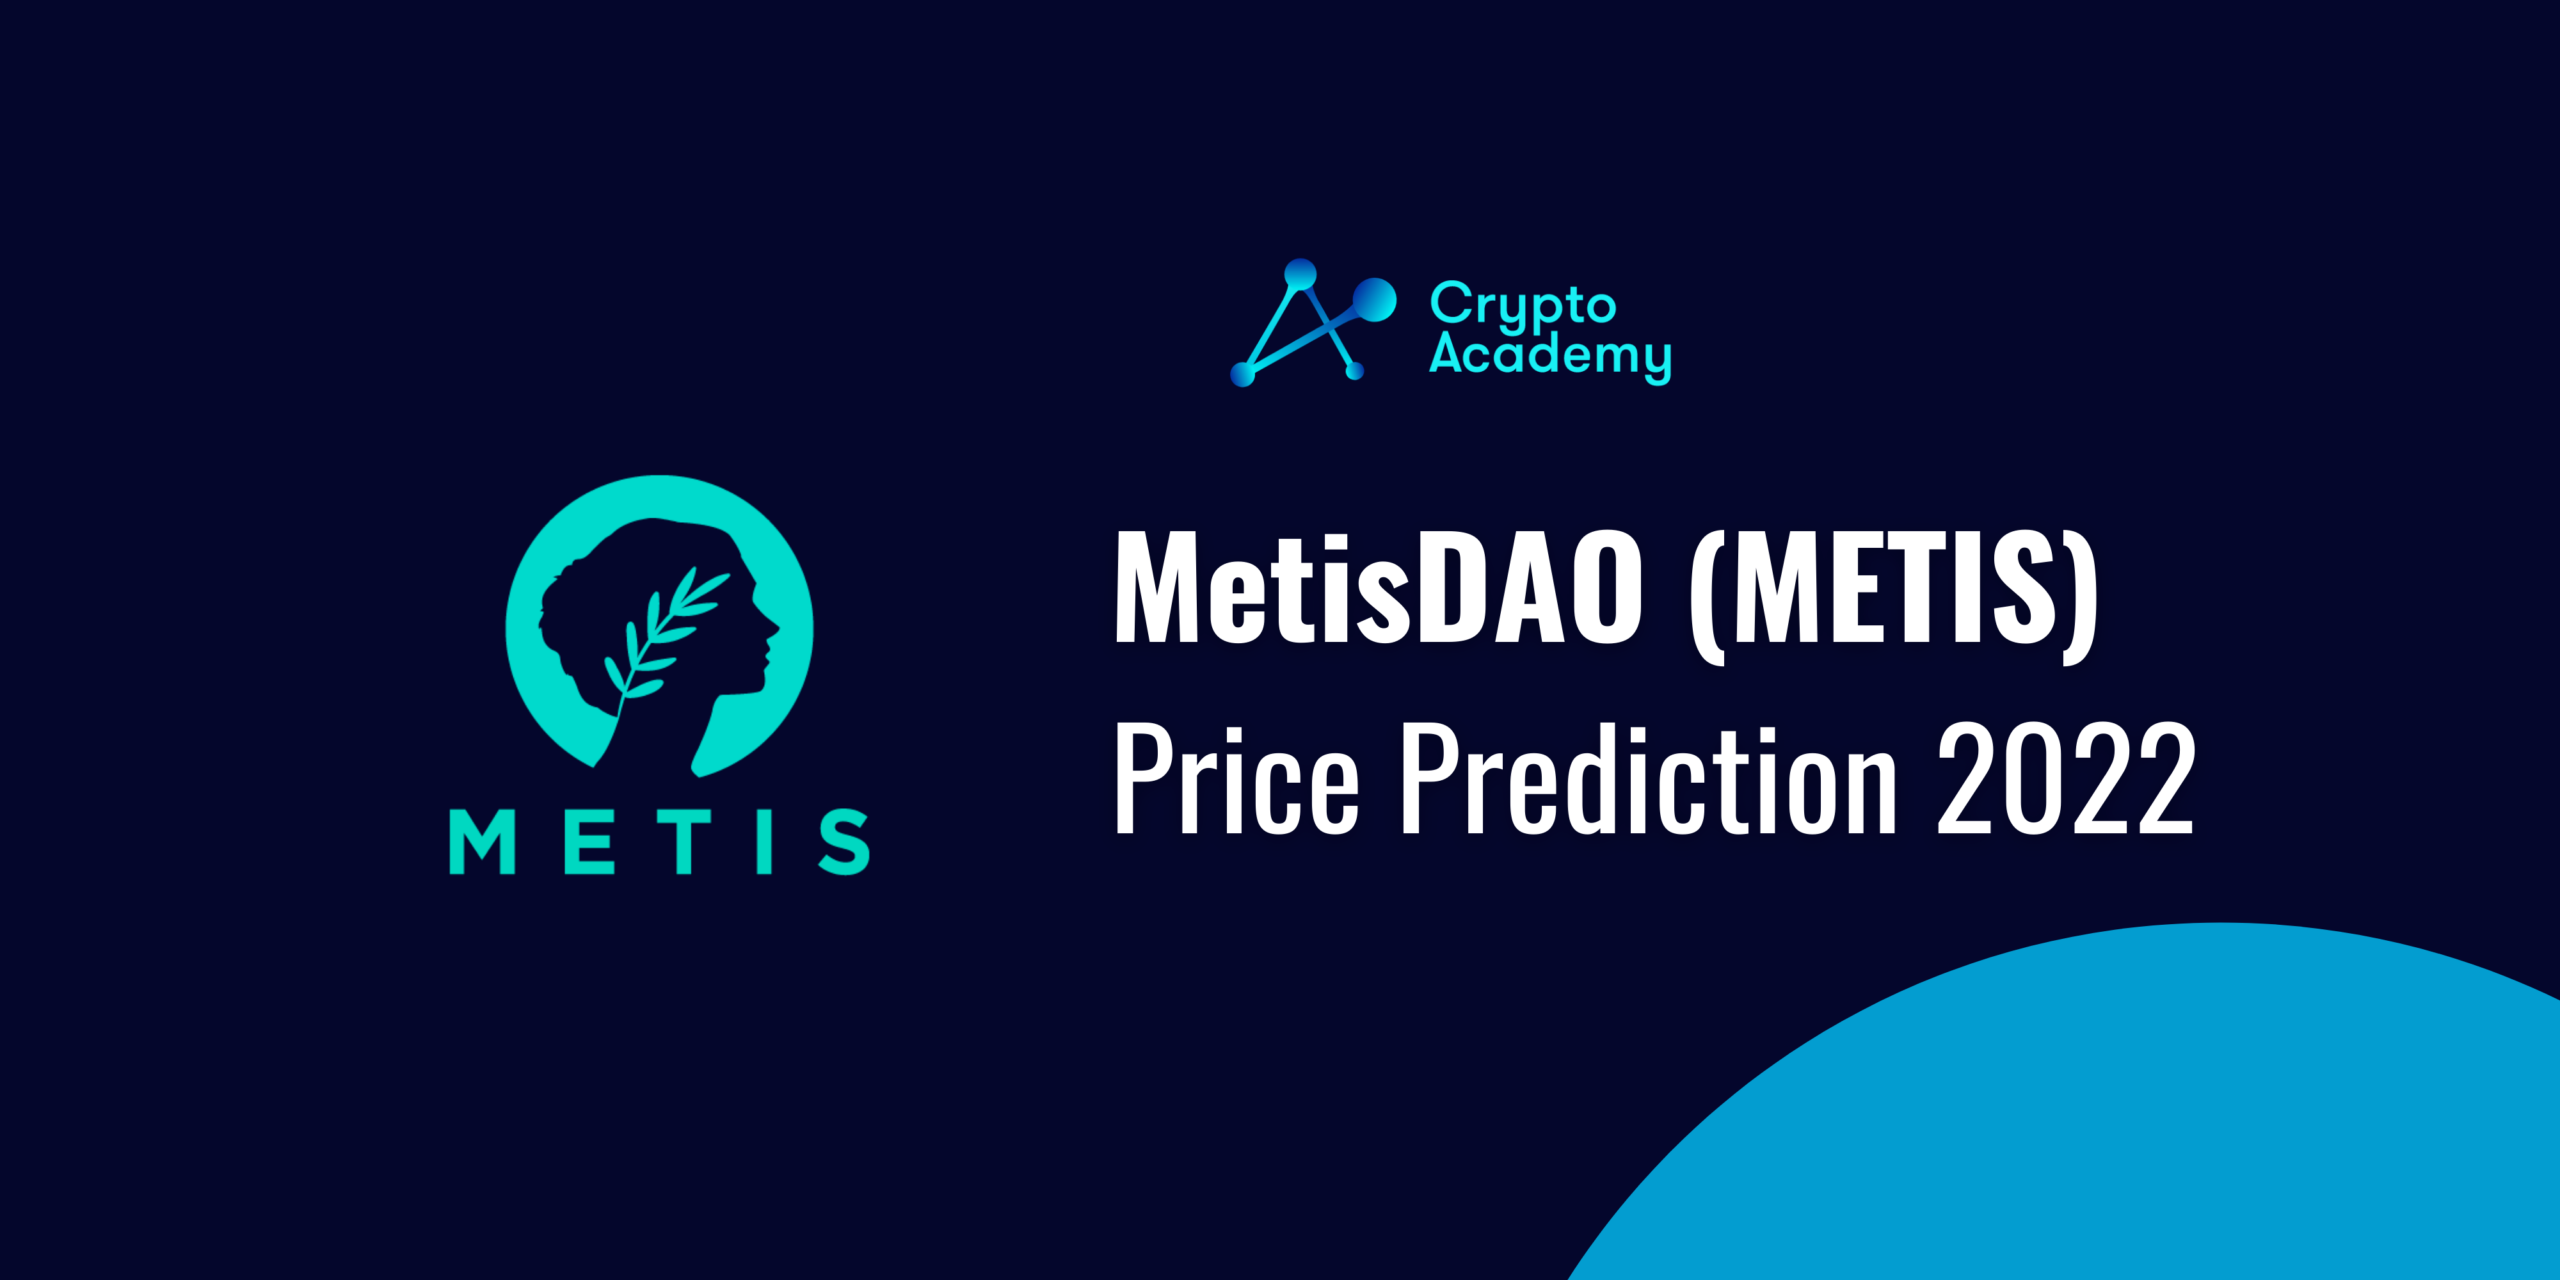 MetisDAO Price Prediction 2022 and Beyond - Can METIS Reach $1000?